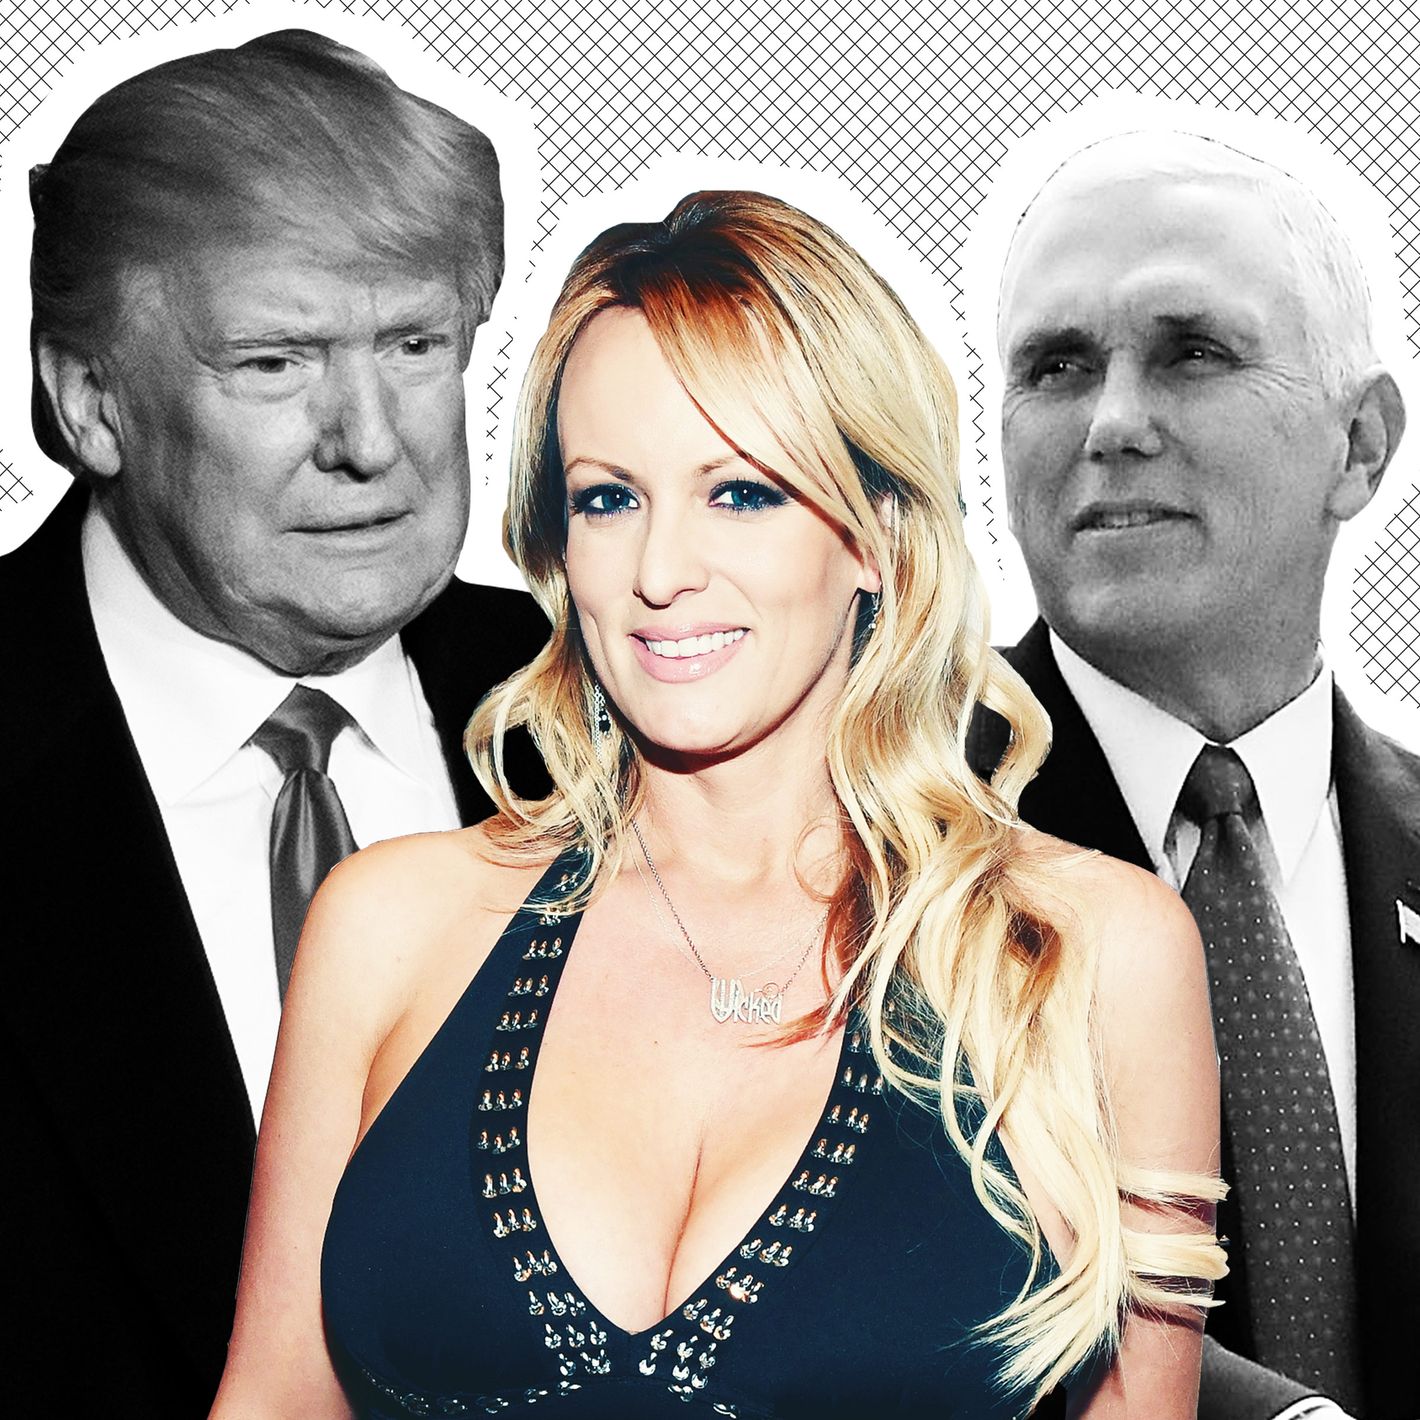 Mike Pence Calls Stormy Daniels Story Baseless Allegations picture pic